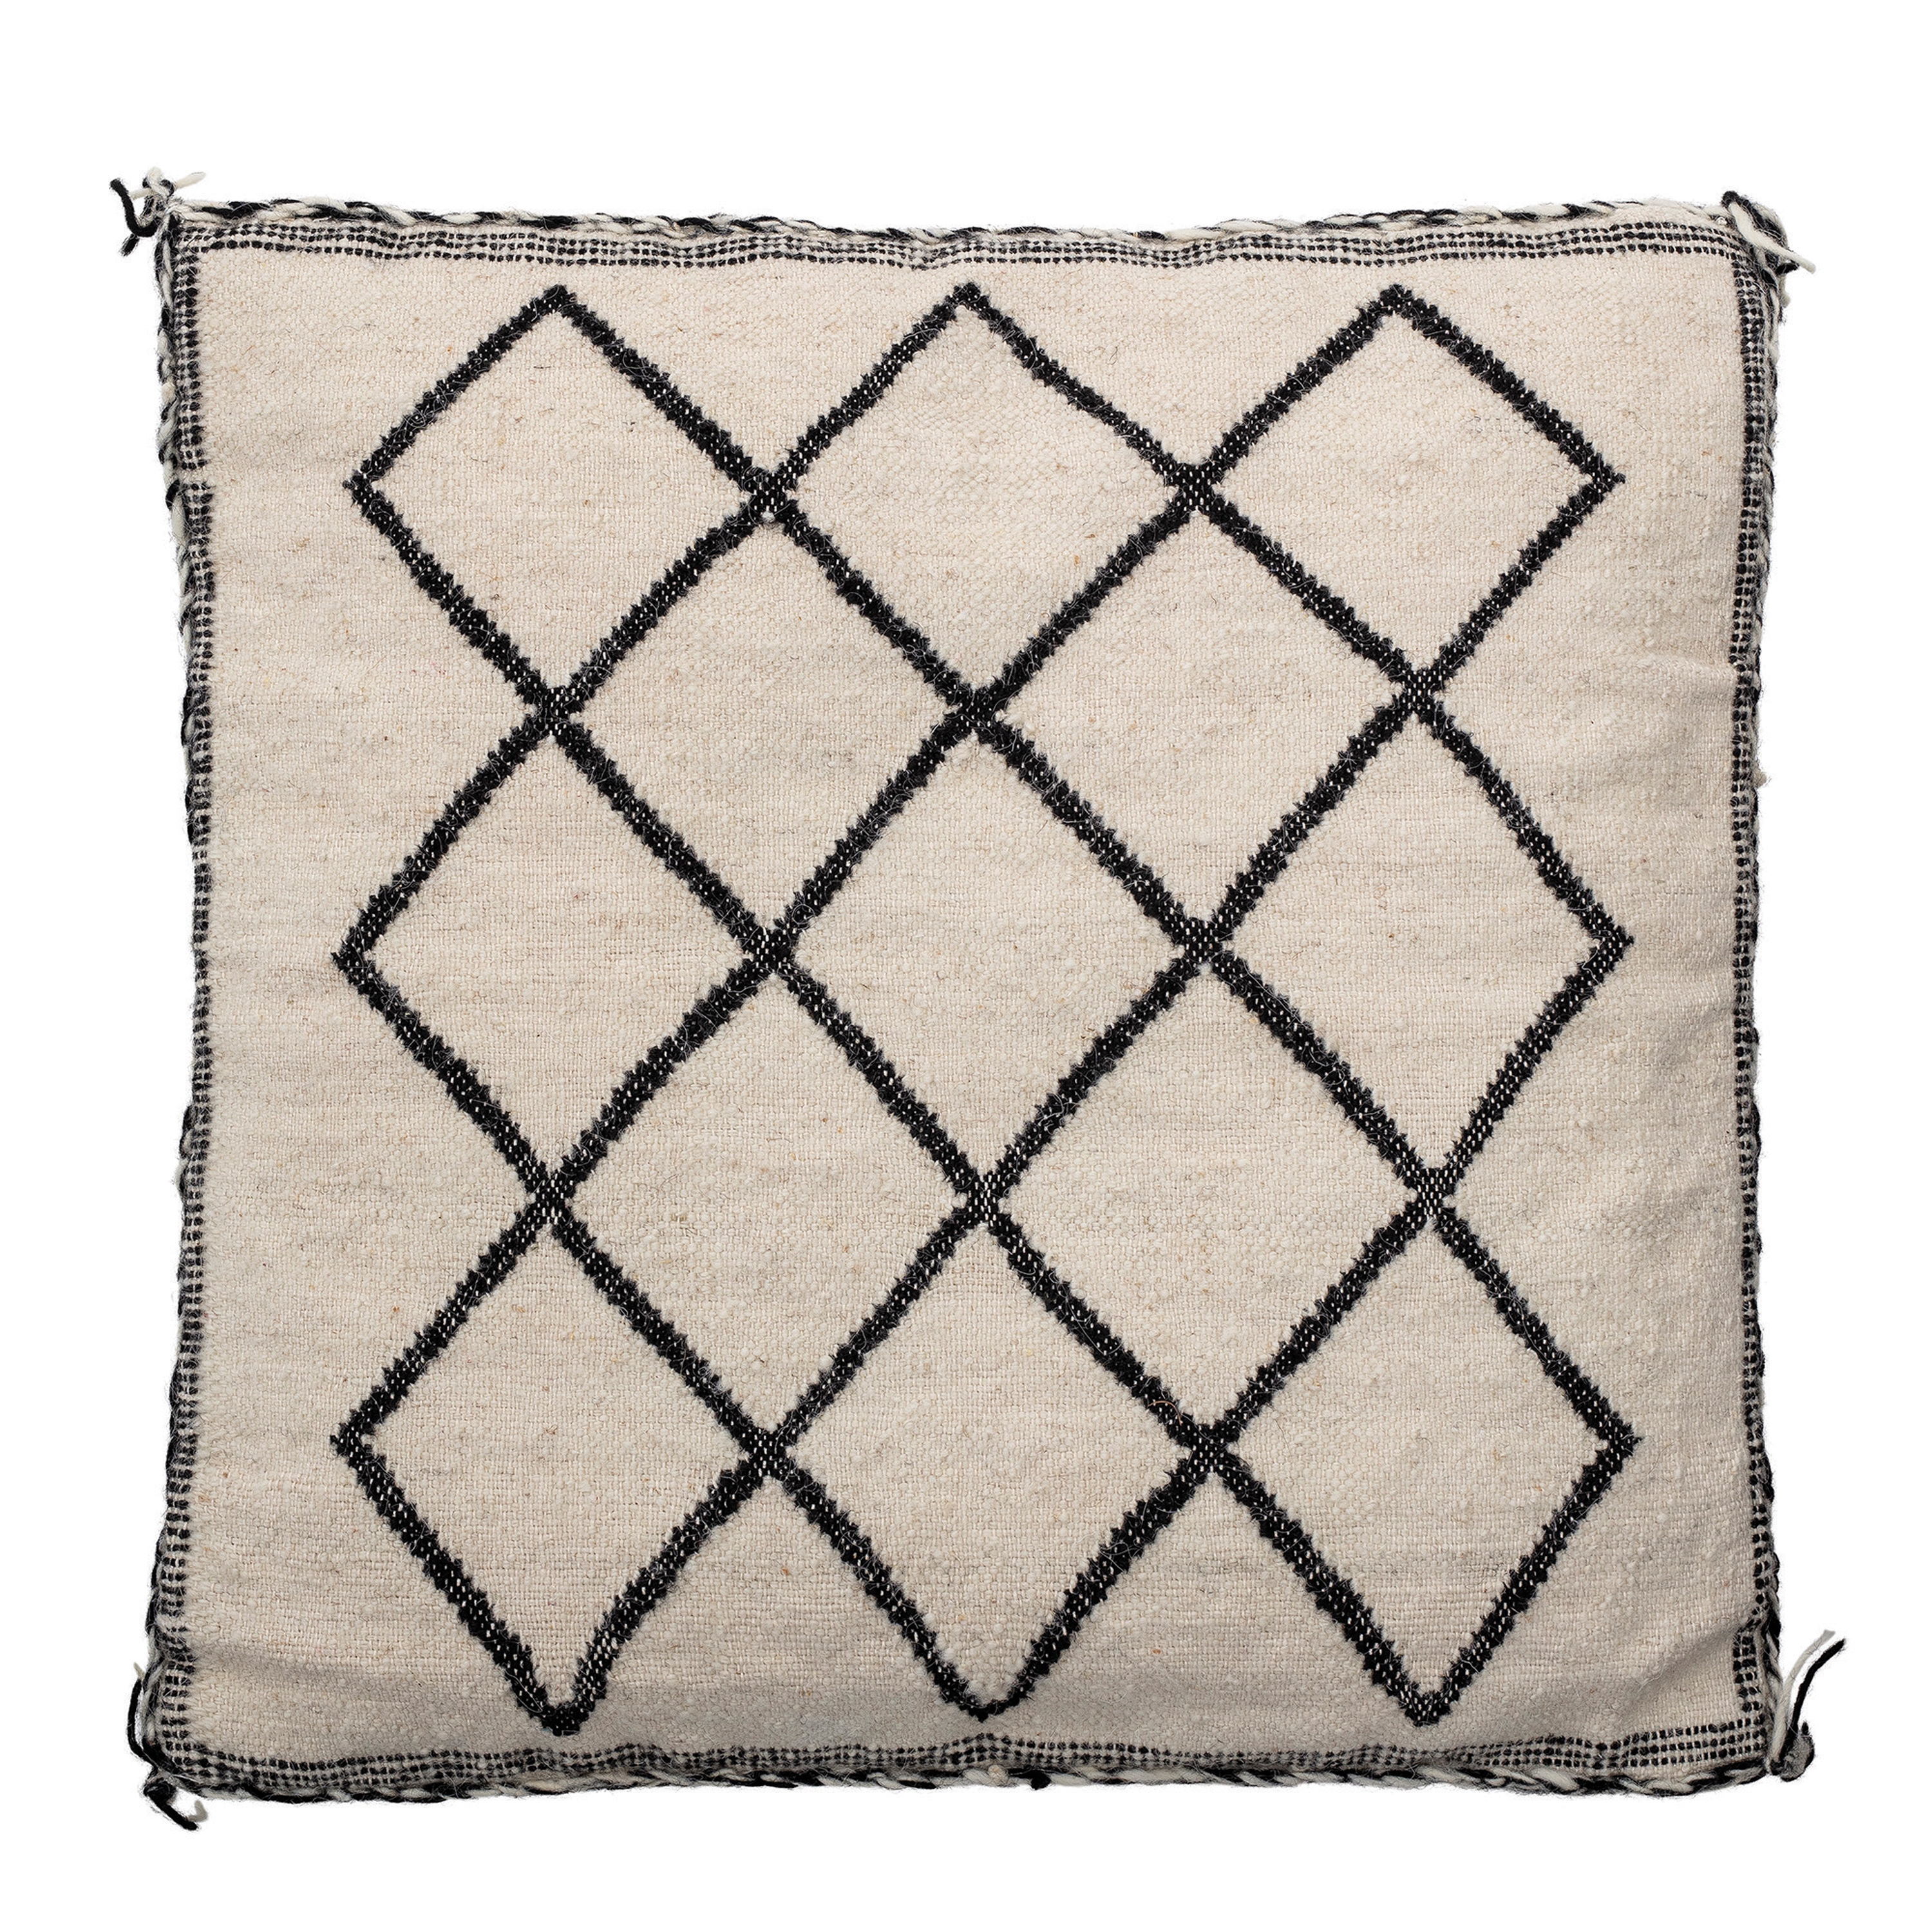 DISC - 20" Square Woven Wool & Cotton Blend Pillow with Diamond Pattern & Braided Trim - Image 0